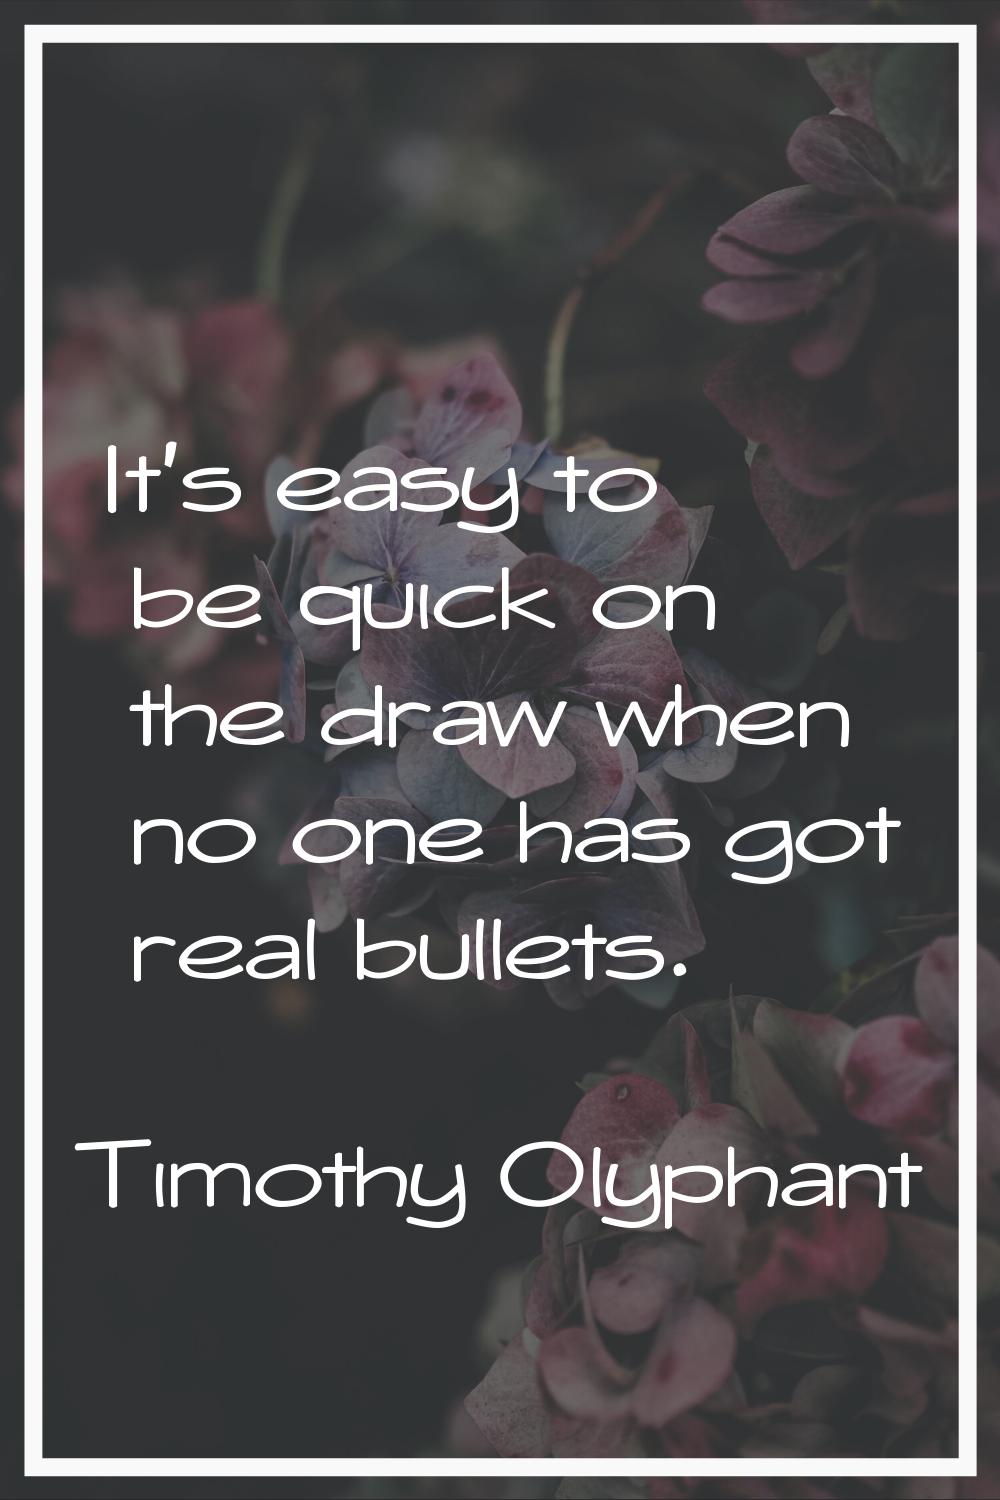 It's easy to be quick on the draw when no one has got real bullets.